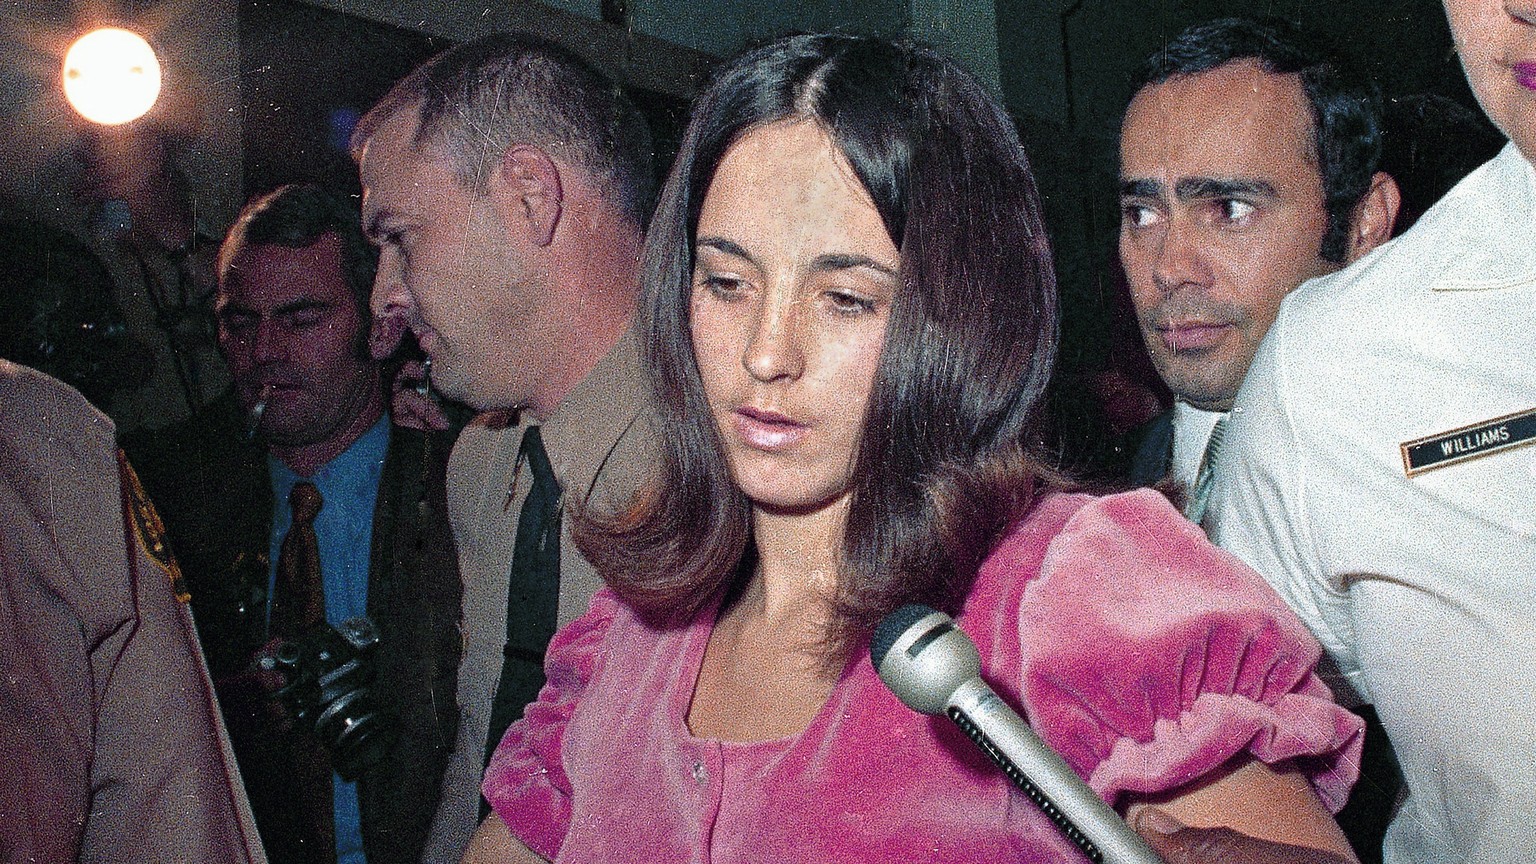 FILE - This 1969 file photo shows Manson Family member Susan Atkins, convicted of the Tate, LaBianca and Hinman murders. A teenage runaway, she met Manson while living in a commune in the Haight-Ashbu ...